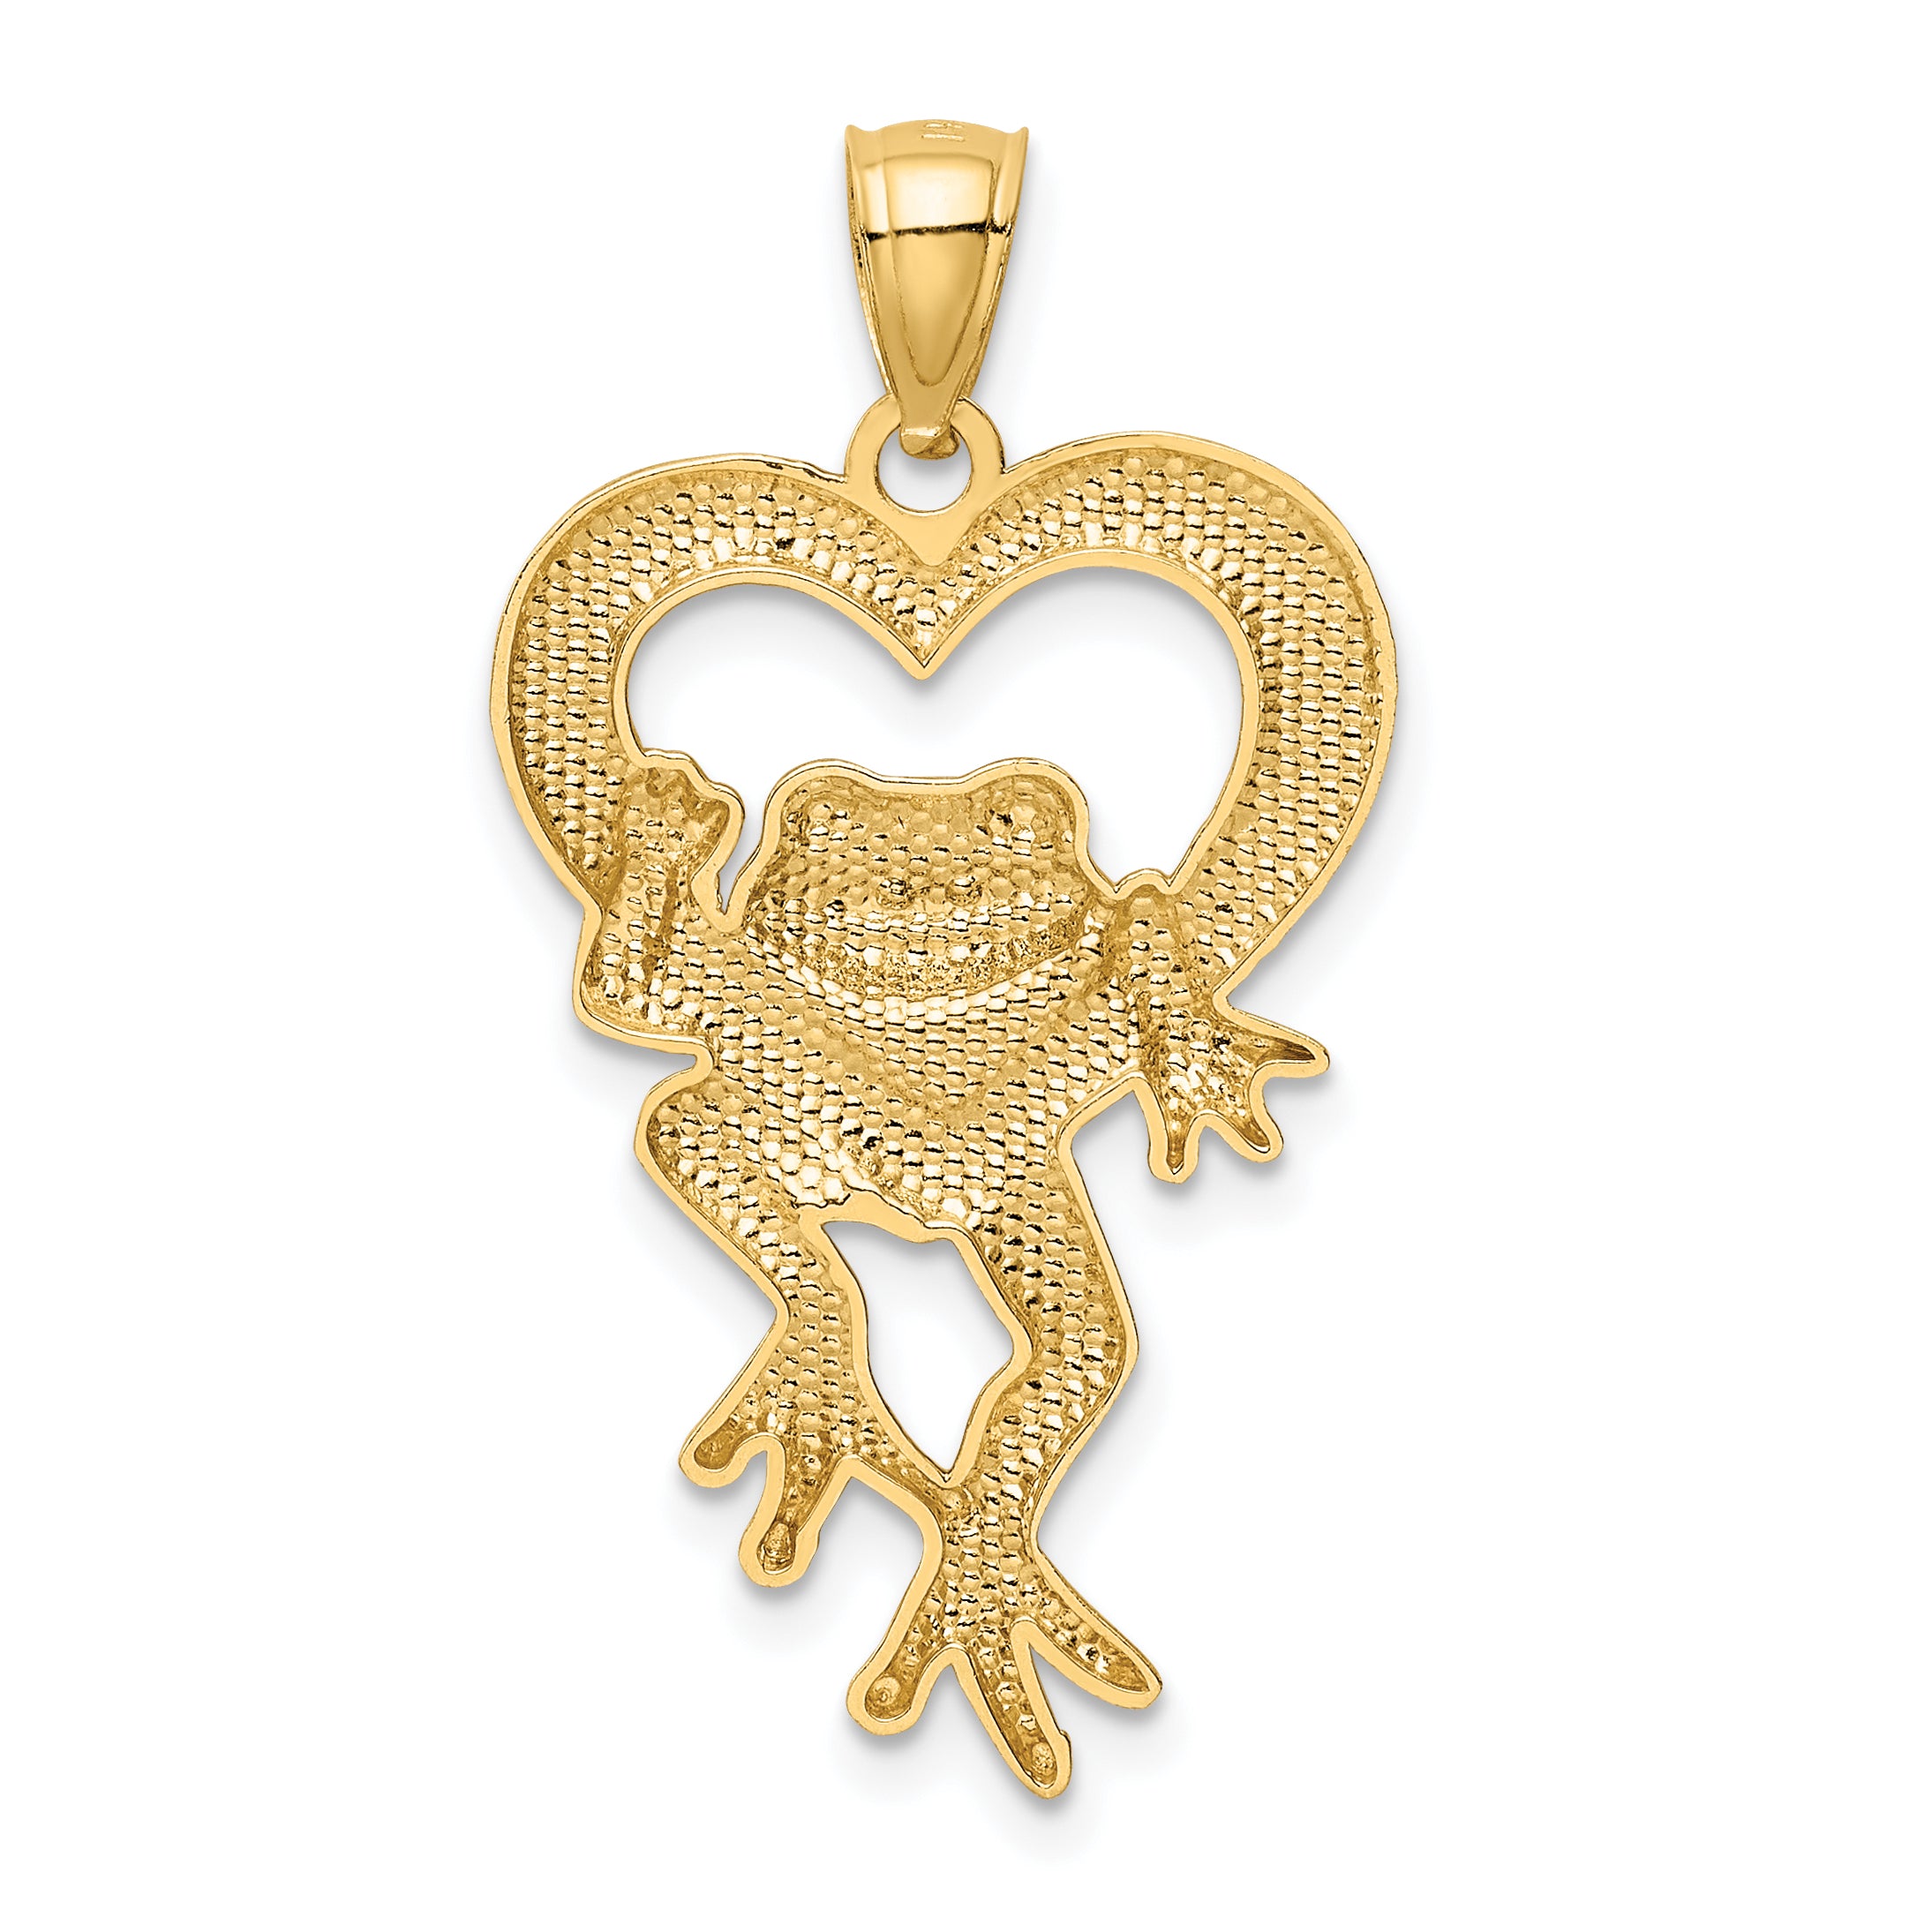 14k and Rhodium D/C Frog in Heart Pendant